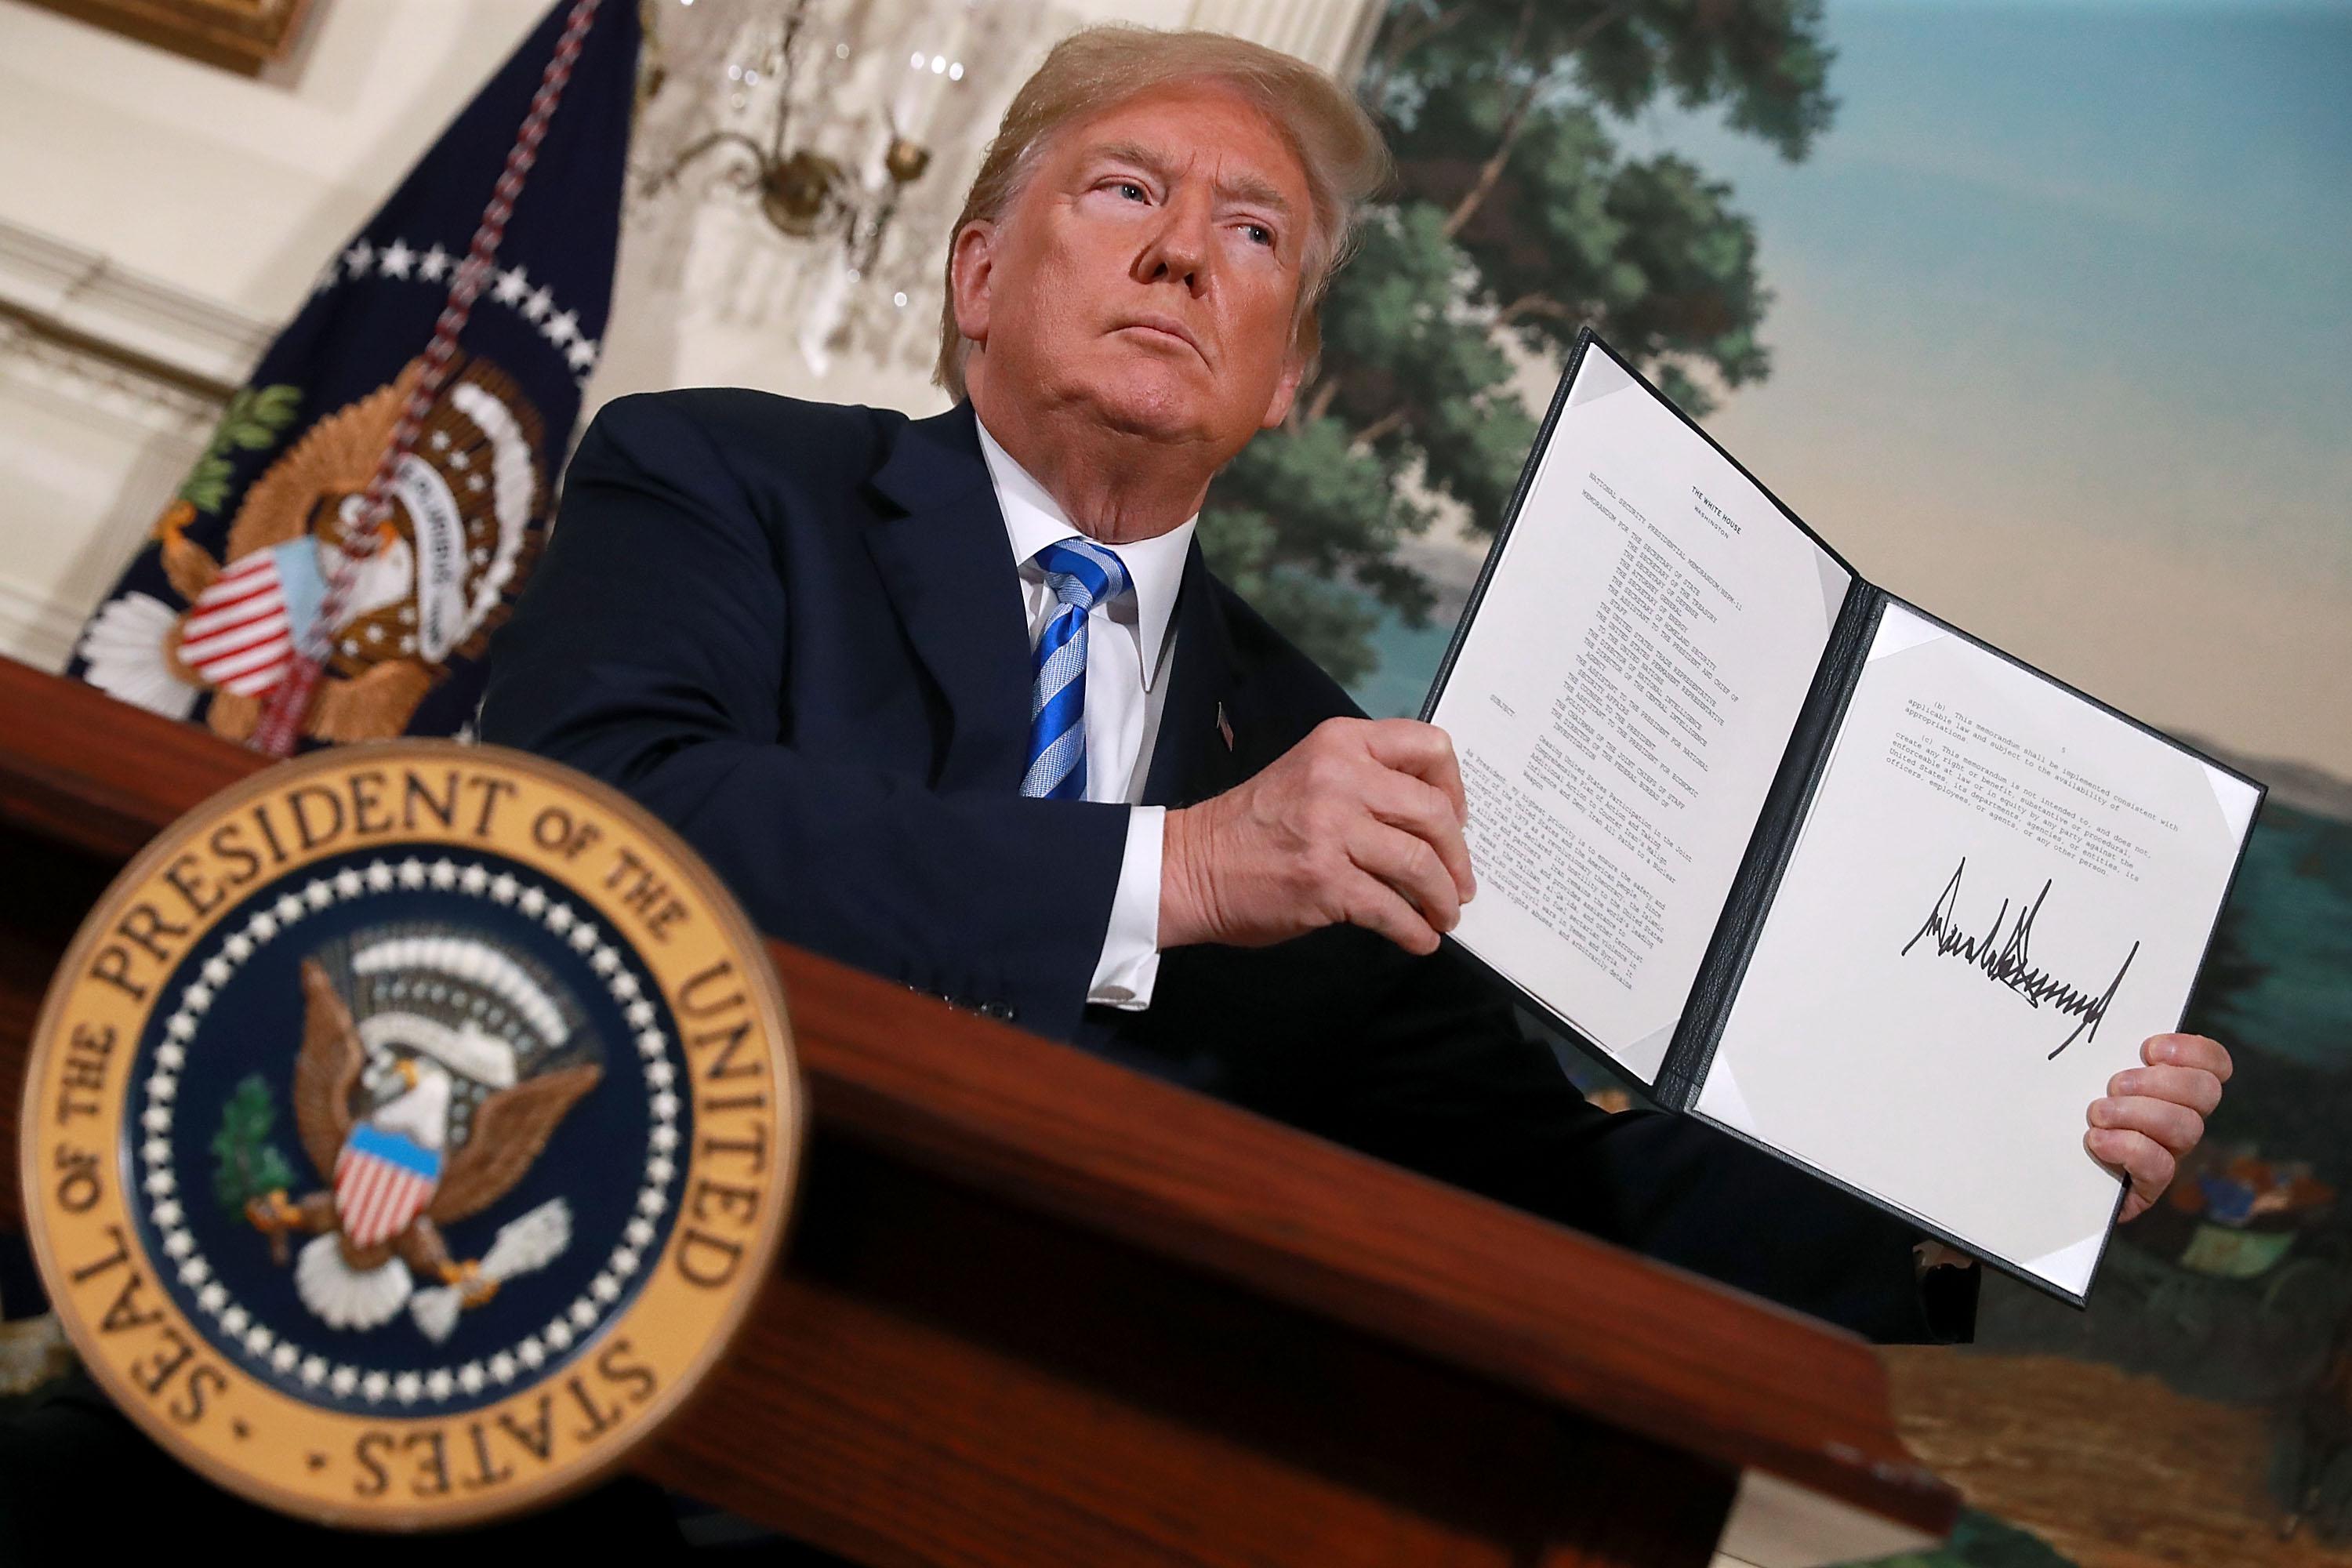 WASHINGTON, DC - MAY 08:  U.S. President Donald Trump holds up a memorandum that reinstates sanctions on Iran after he announced his decision to withdraw the United States from the 2015 Iran nuclear deal in the Diplomatic Room at the White House May 8, 2018 in Washington, DC. After two and a half years of negotiations, Iran agreed in 2015 to end its nuclear program in exchange for Western countries, including the United States, lifting decades of economic sanctions. Since then international inspectors have not found any violations of the terms by Iran.  (Photo by Chip Somodevilla/Getty Images)